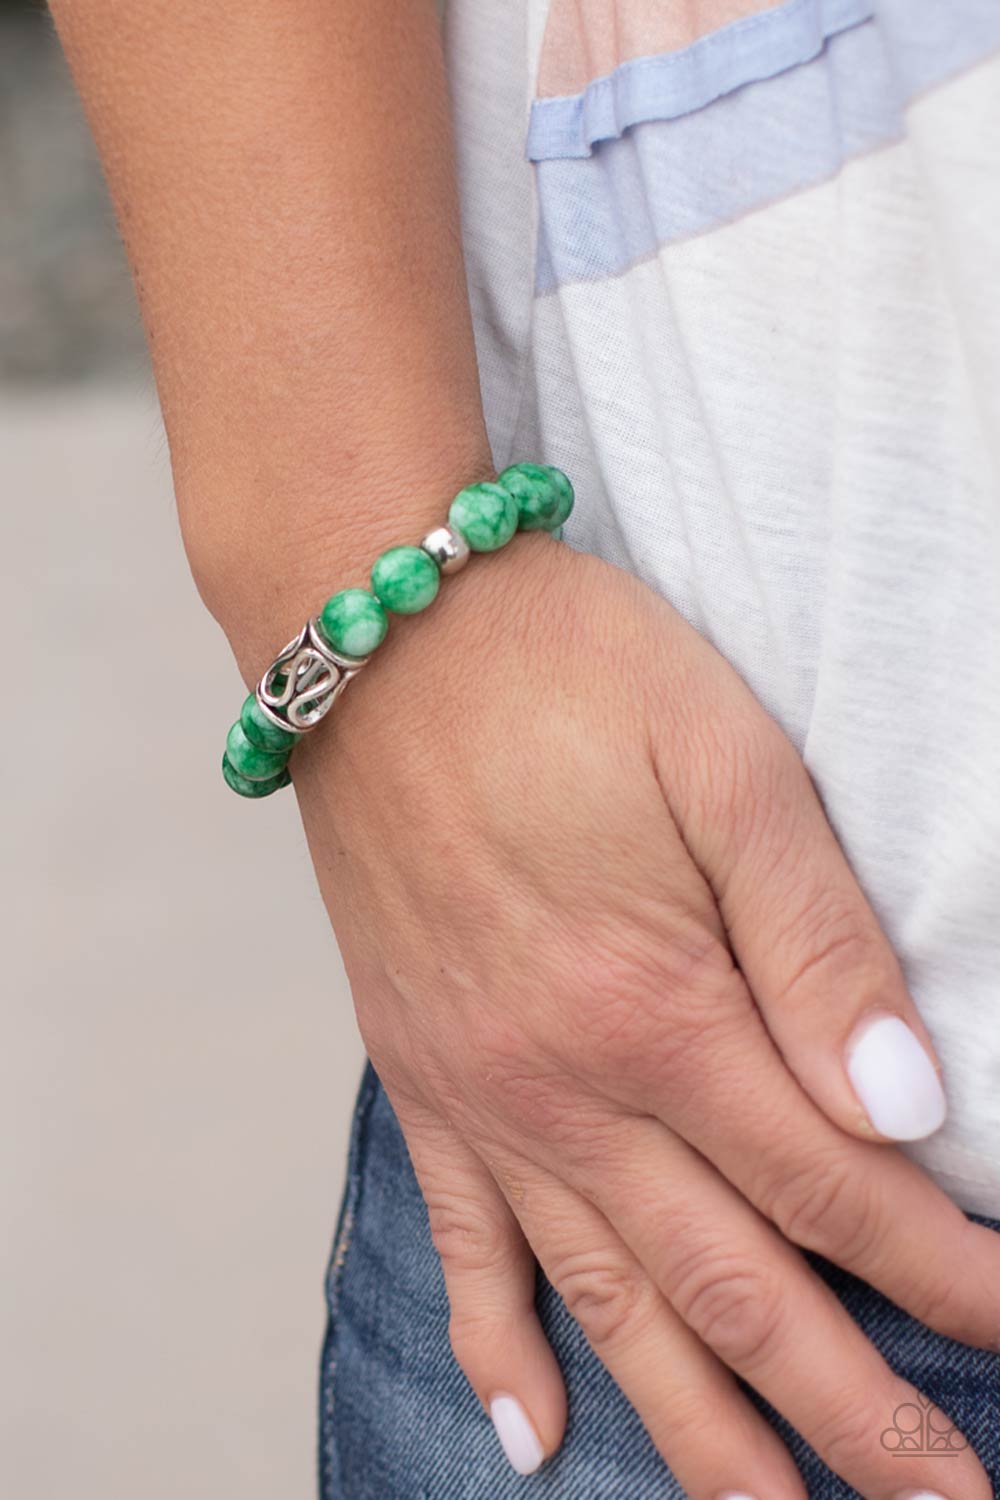 Soothes The Soul - Green bracelet